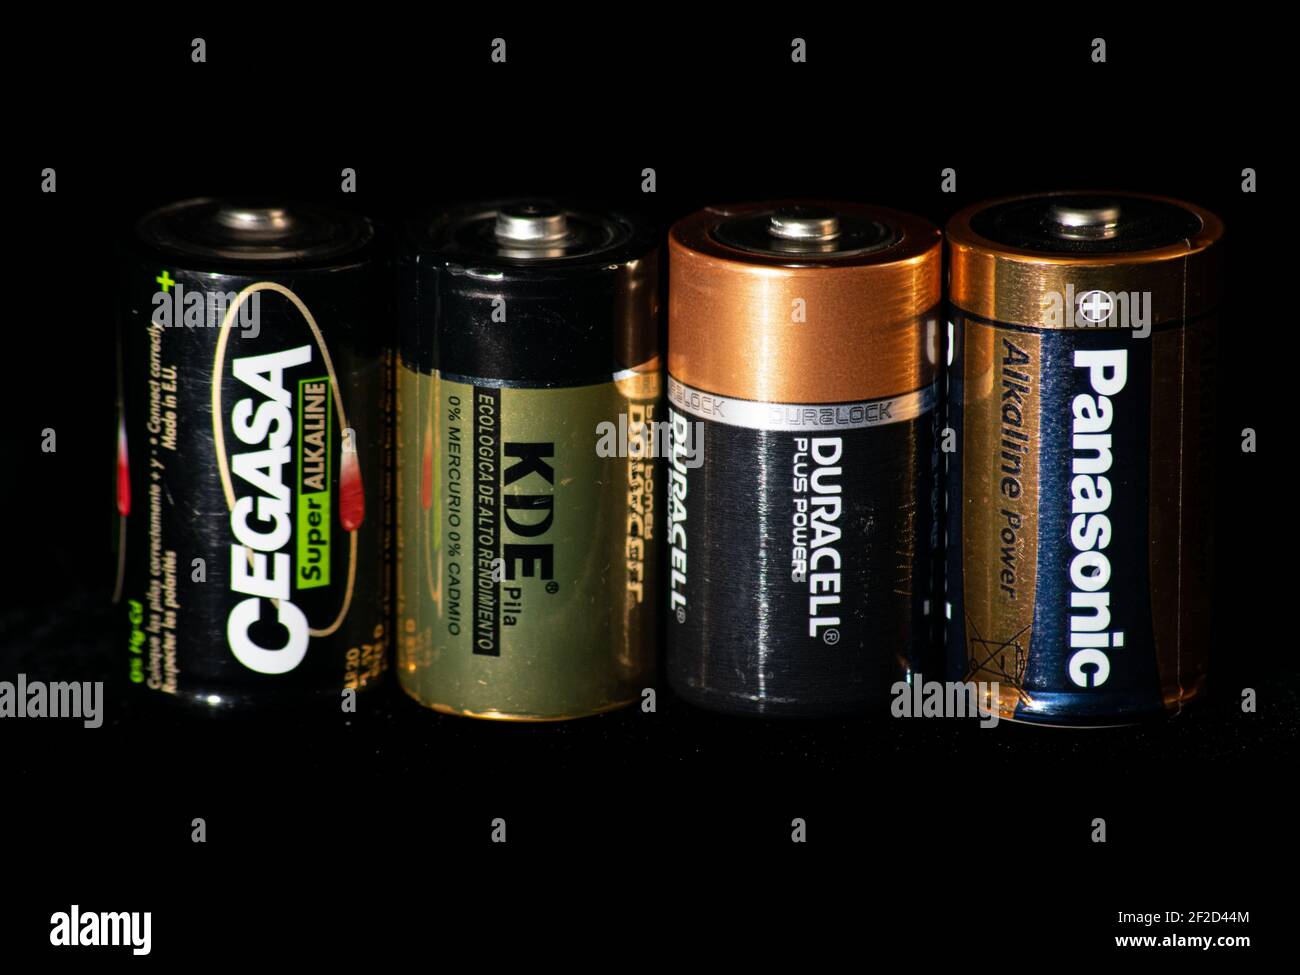 Used dry batteries cells D type 1.5 volt from different brands over a black background. Acid batteries used im toys and technology. Stock Photo